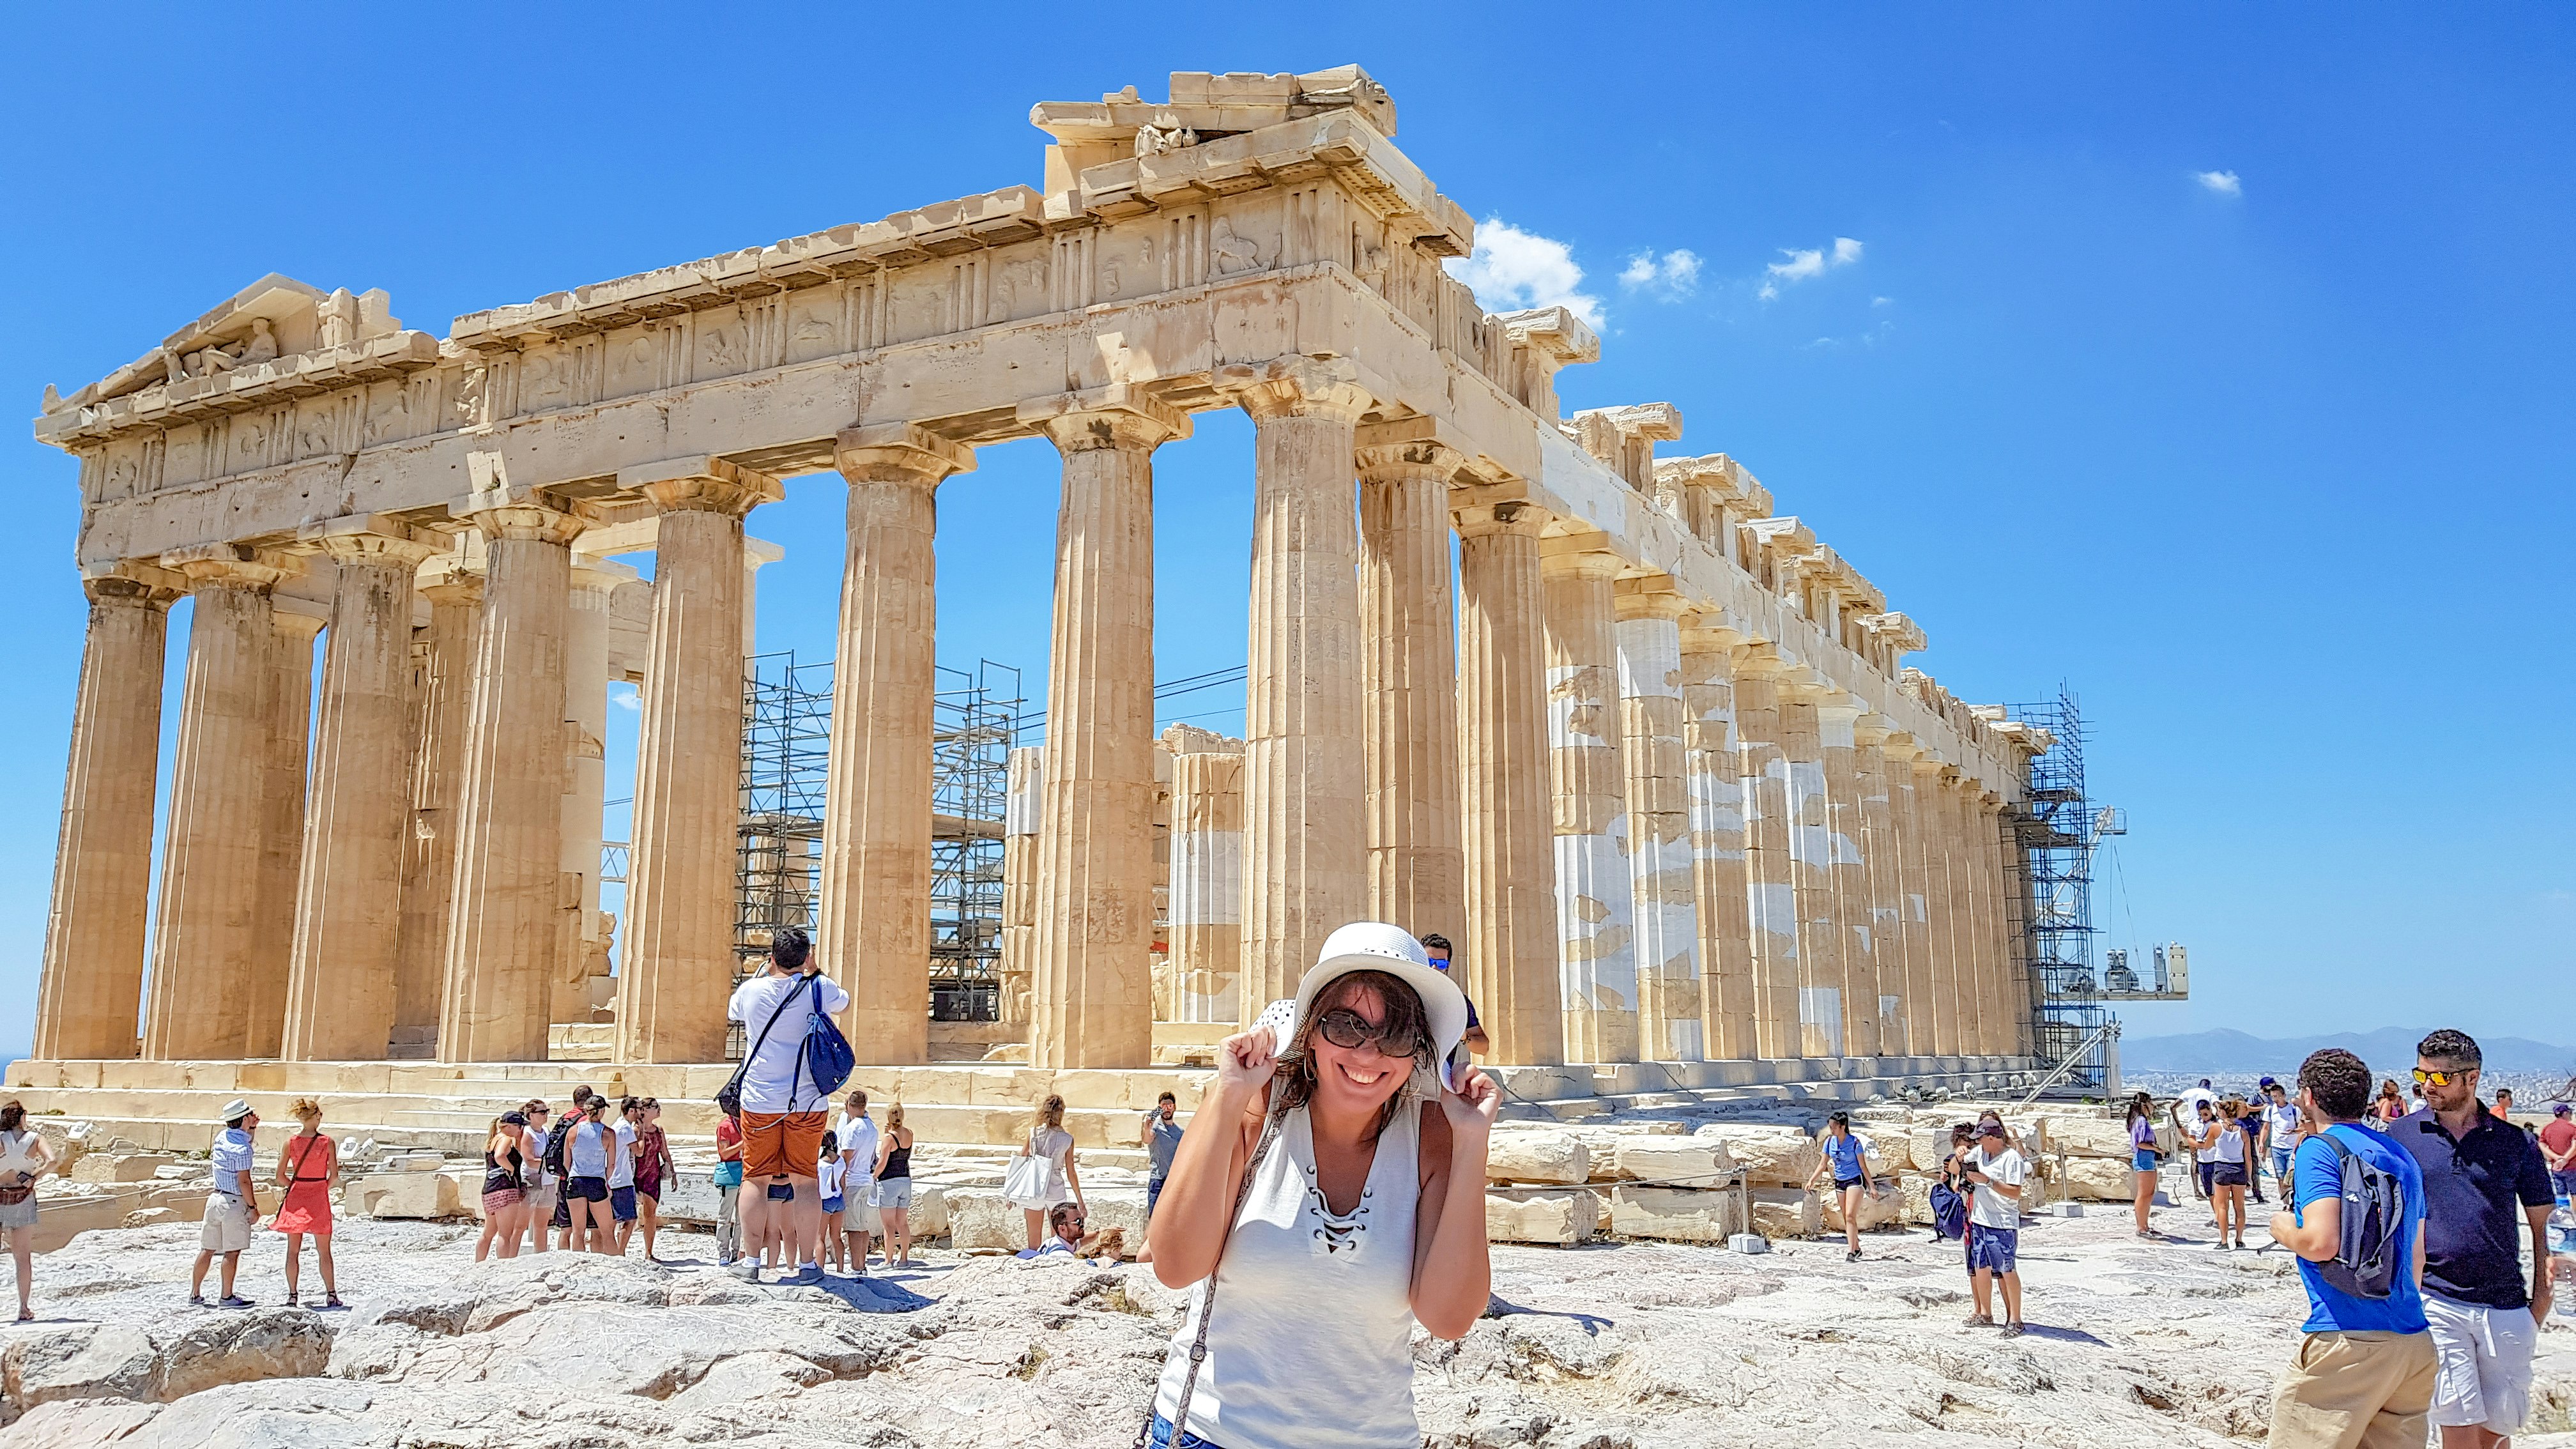 Tourists at the Parthenon in Greece